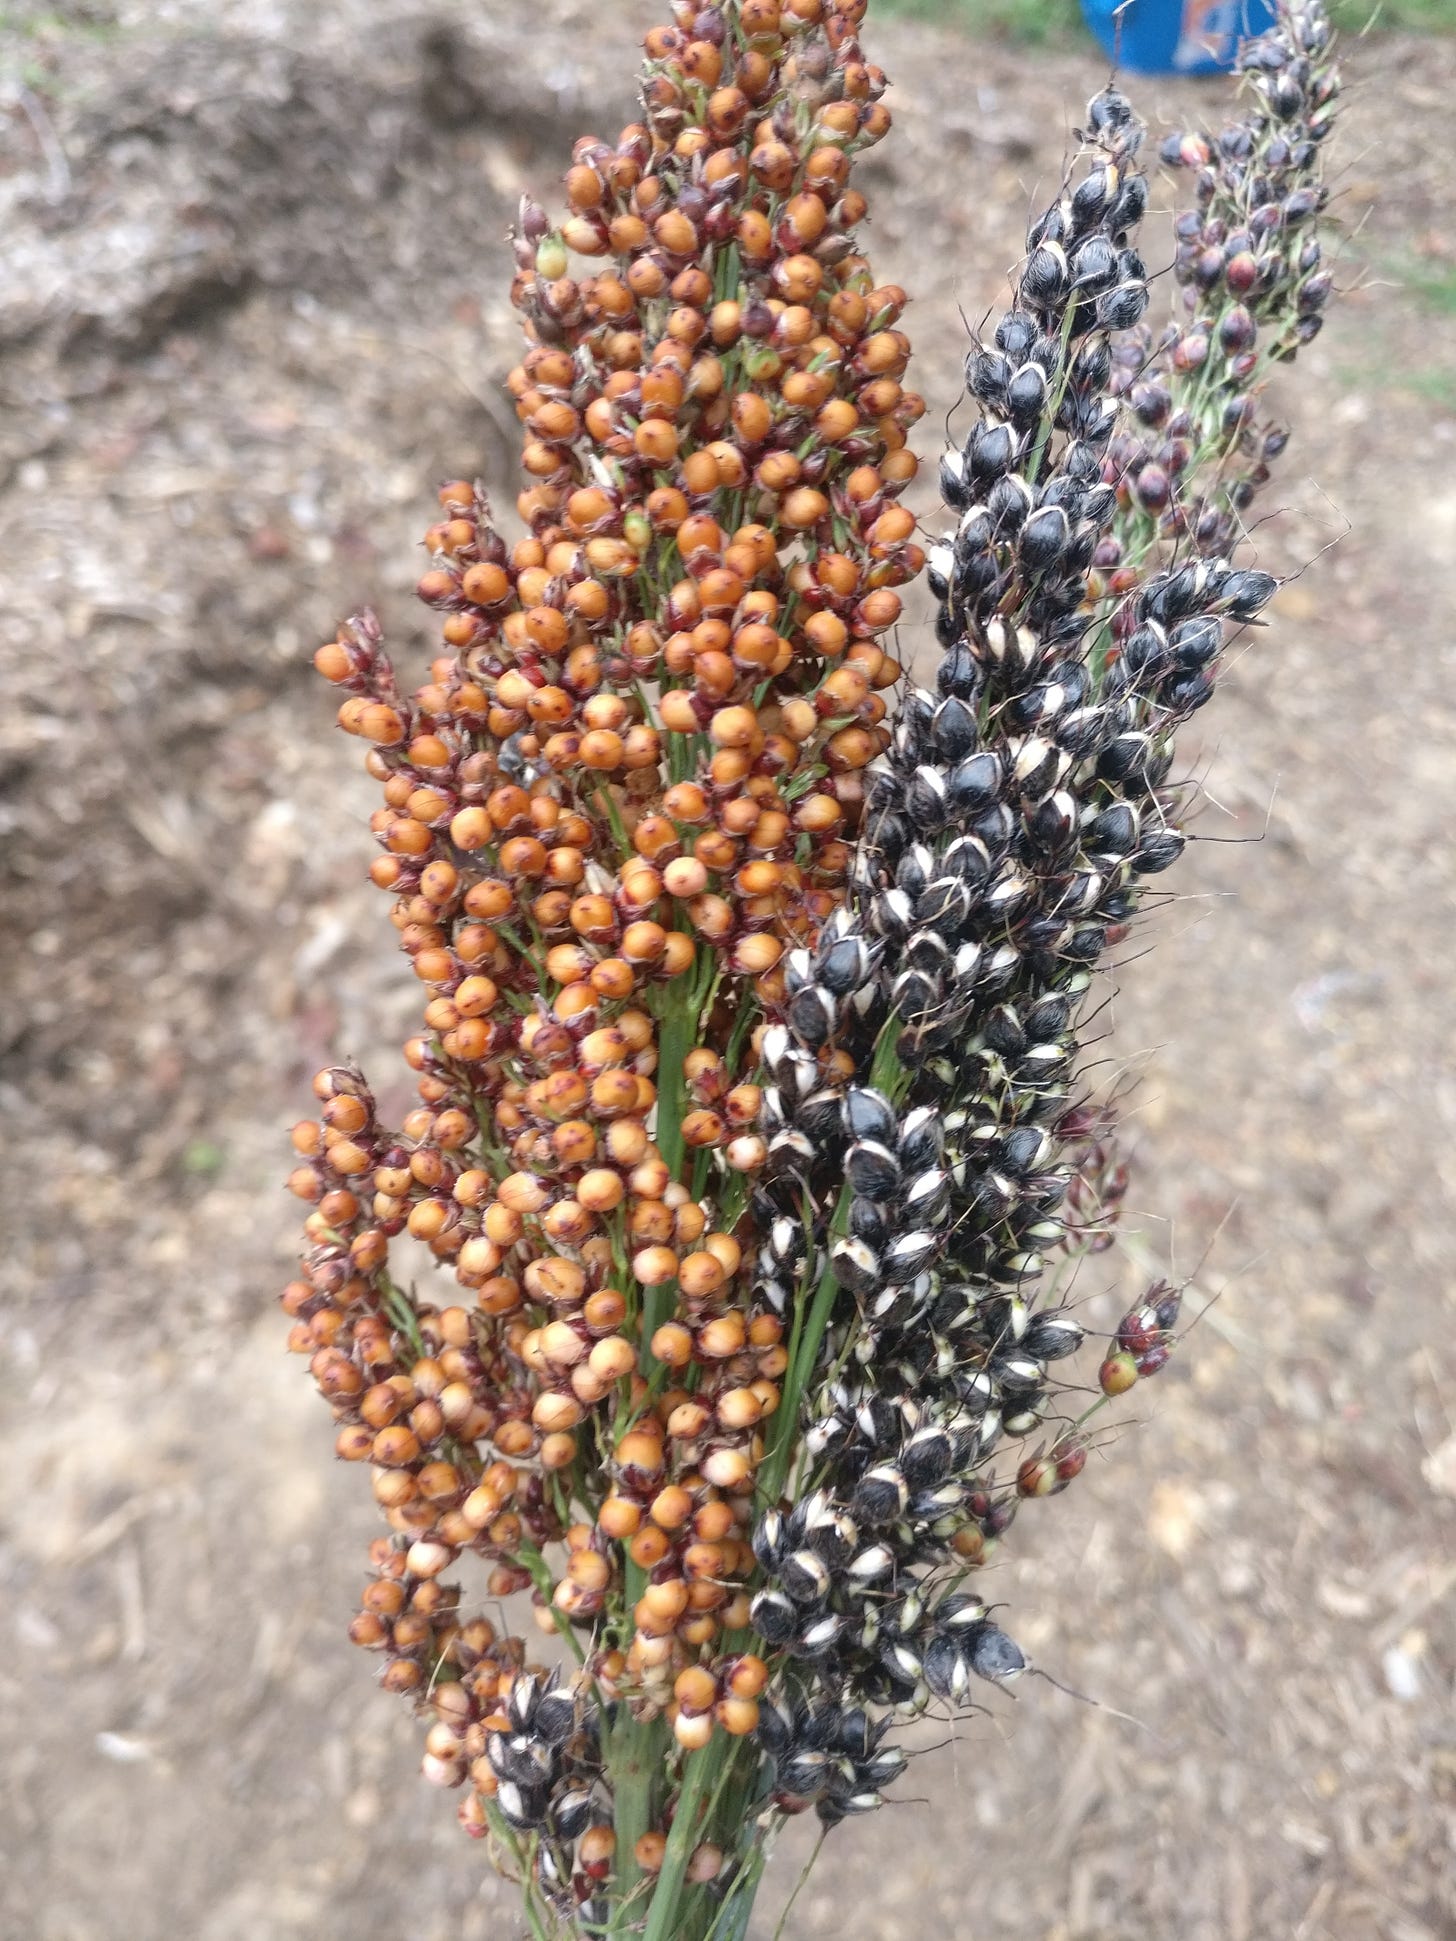 A photograph of two seed heads from a sorghum plant.